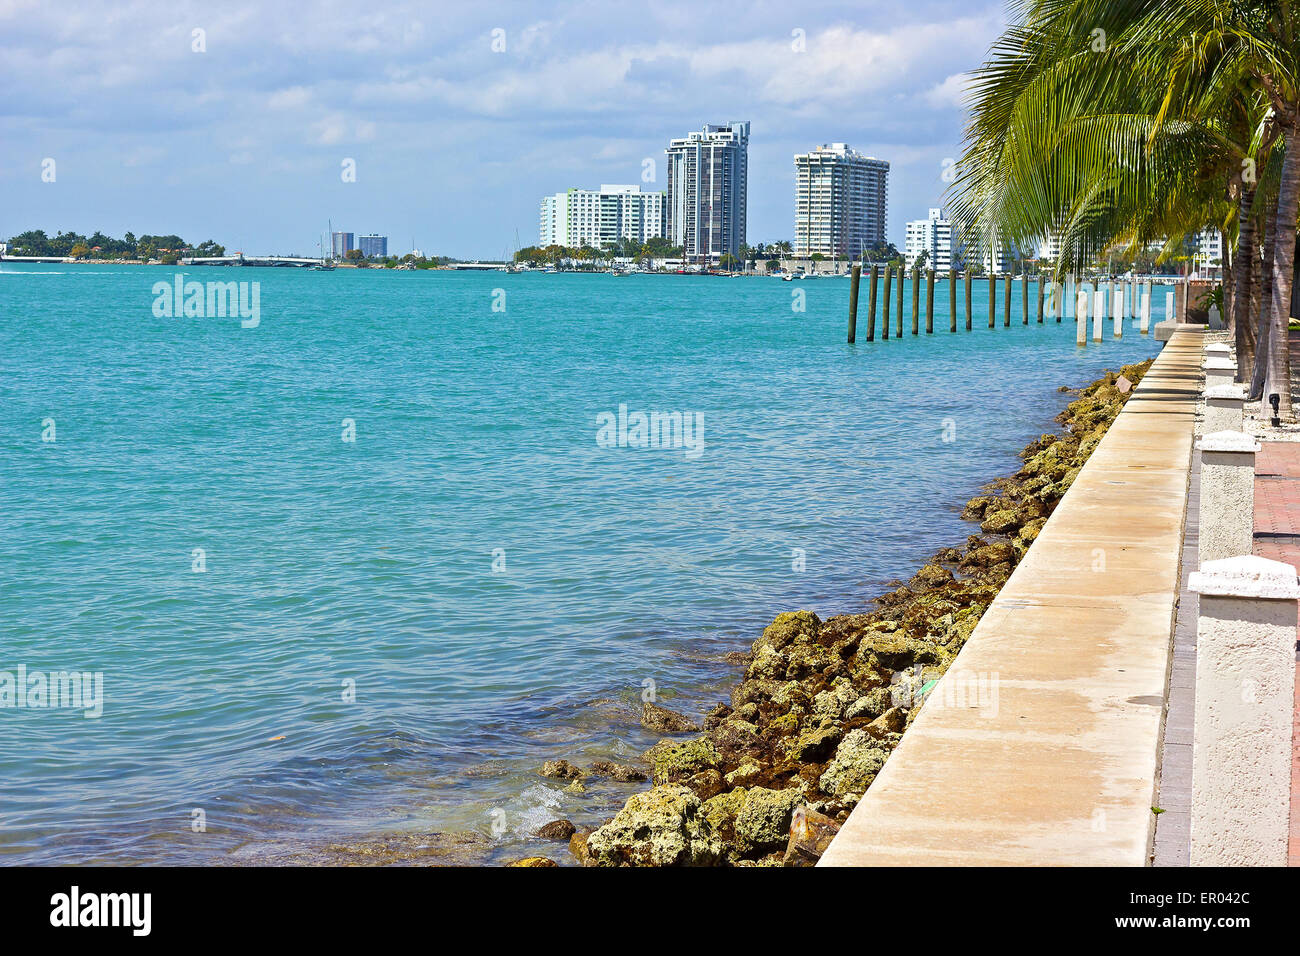 View of waterway with city buildings in Miami Beach, Florida. Stock Photo